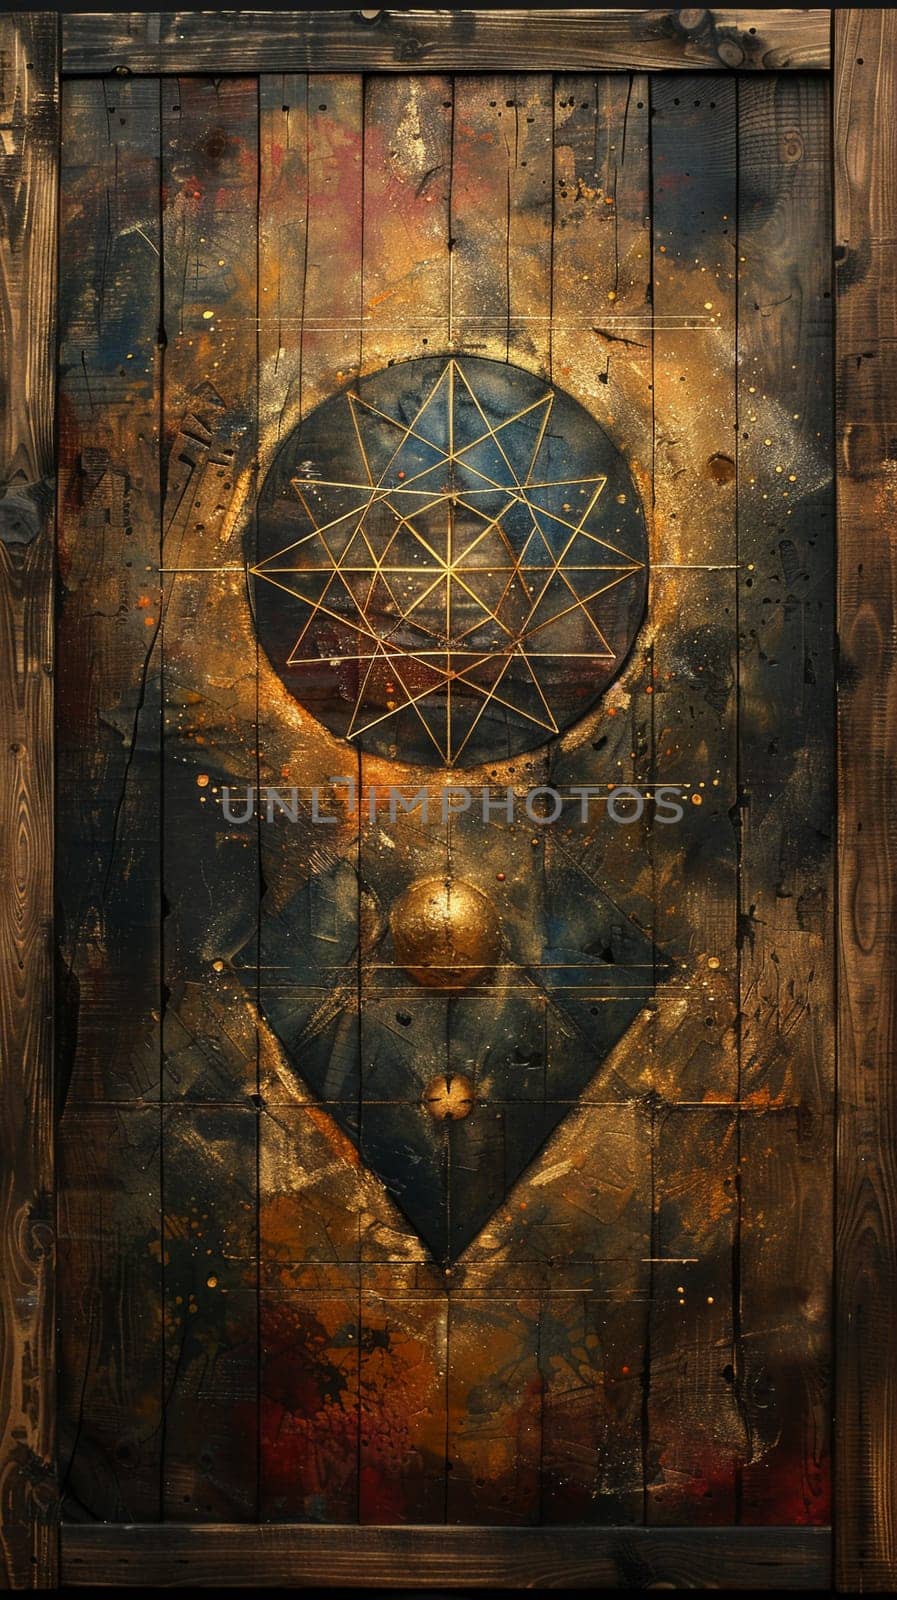 Kabbalistic Tree of Life Symbol Etched into Wood, The mystical diagram blurs into the material, a map of divine emanation and pathworking.